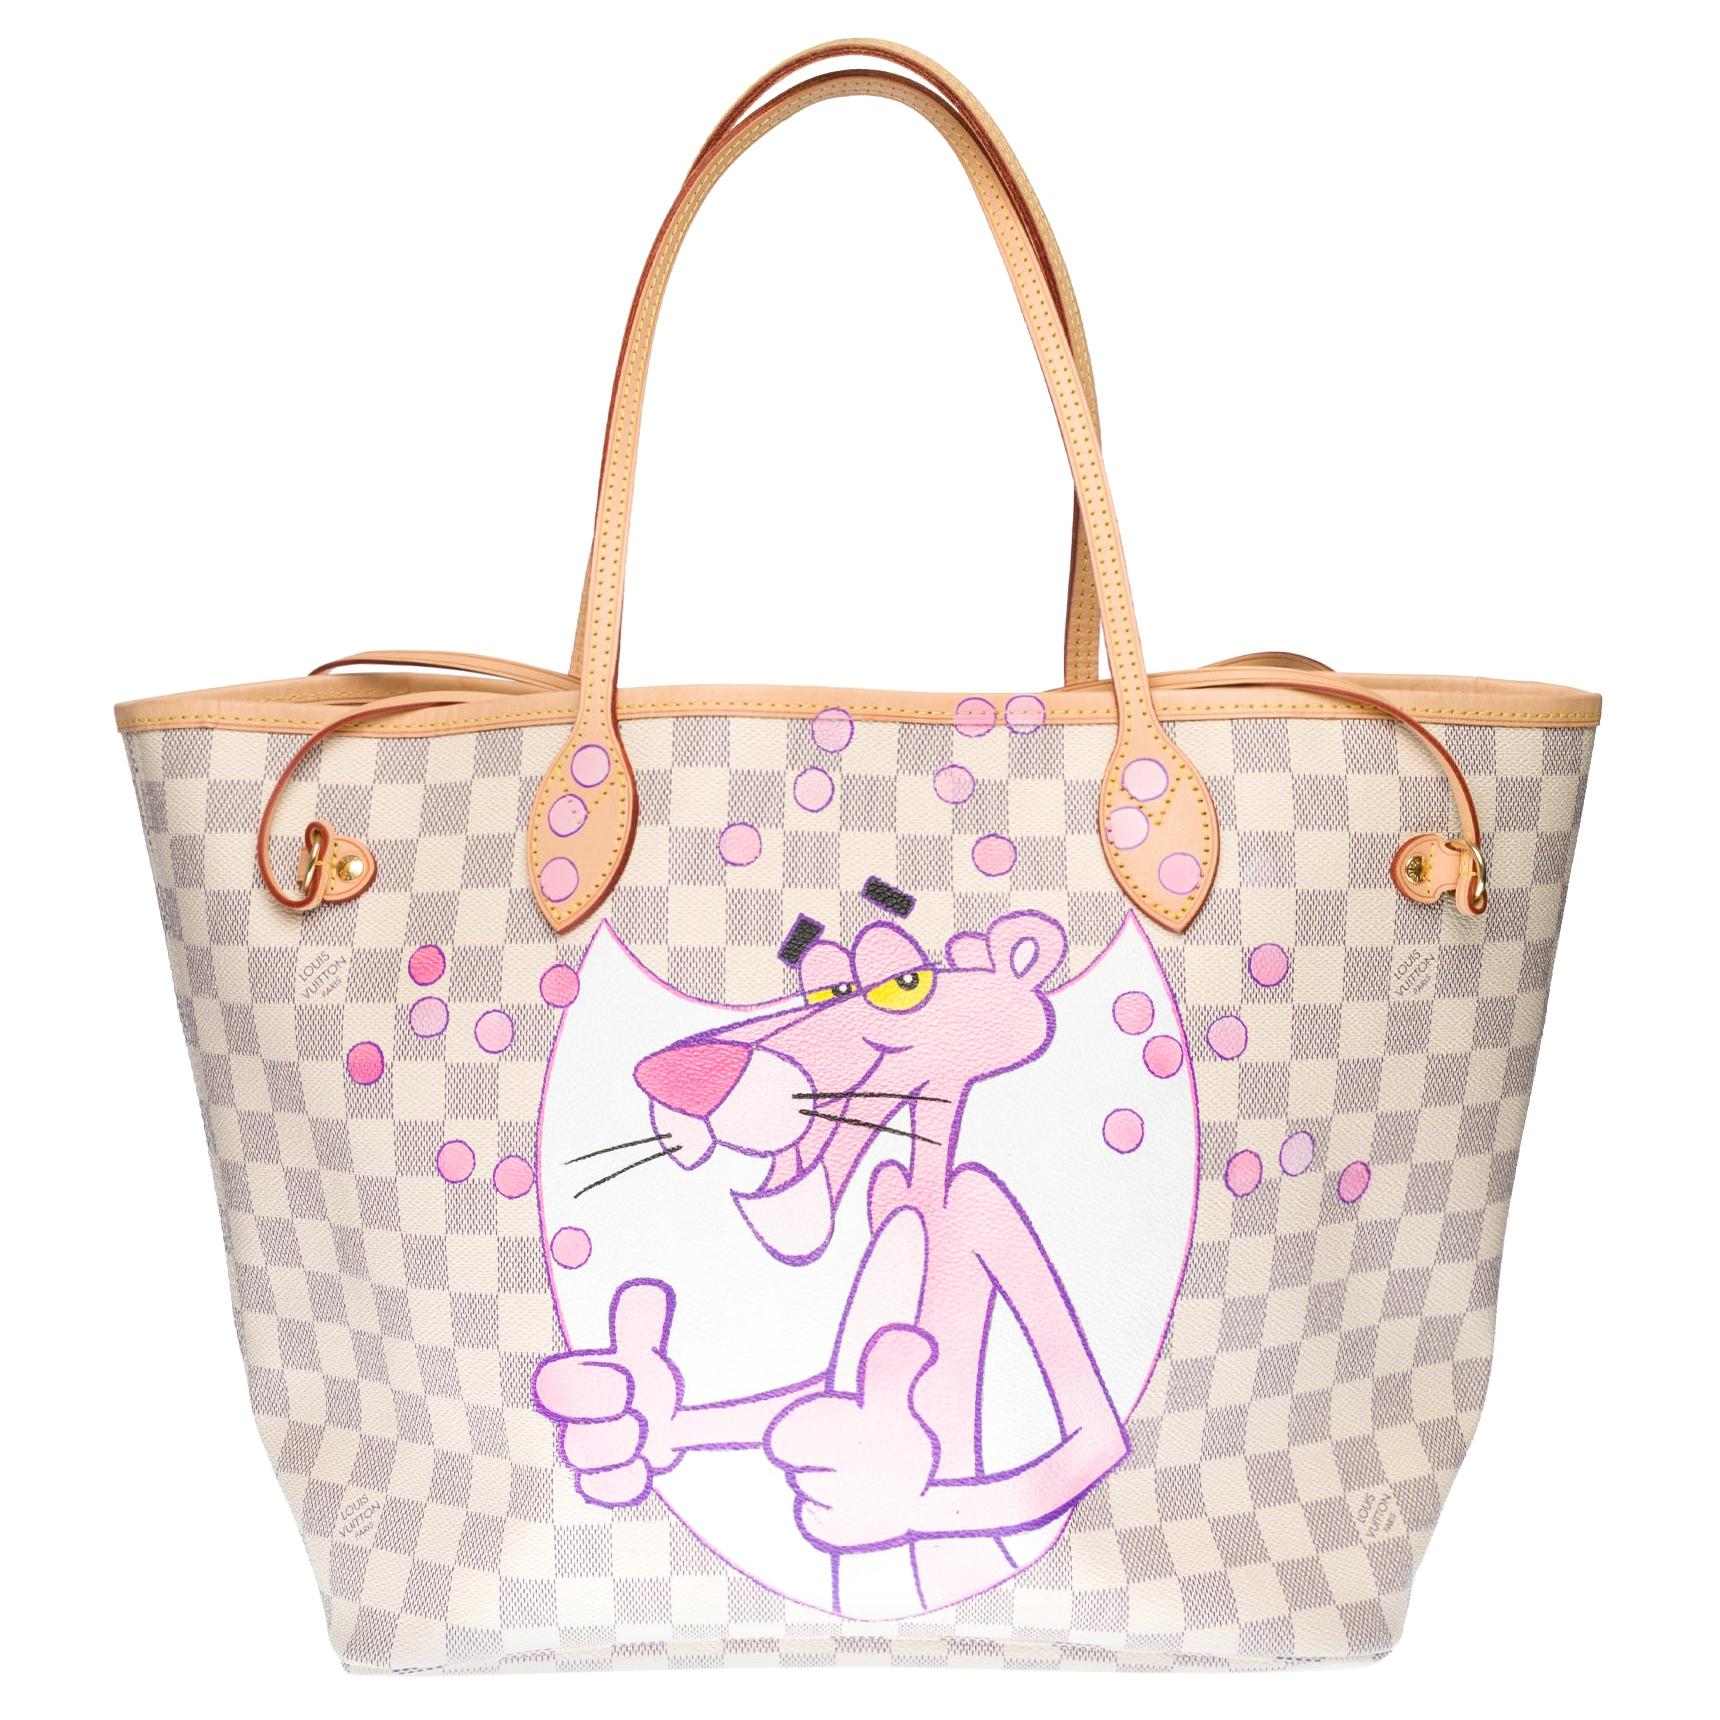 Customized Neverfull Tote bag "Pink Panther & Champagne Bubbles" in beige canvas